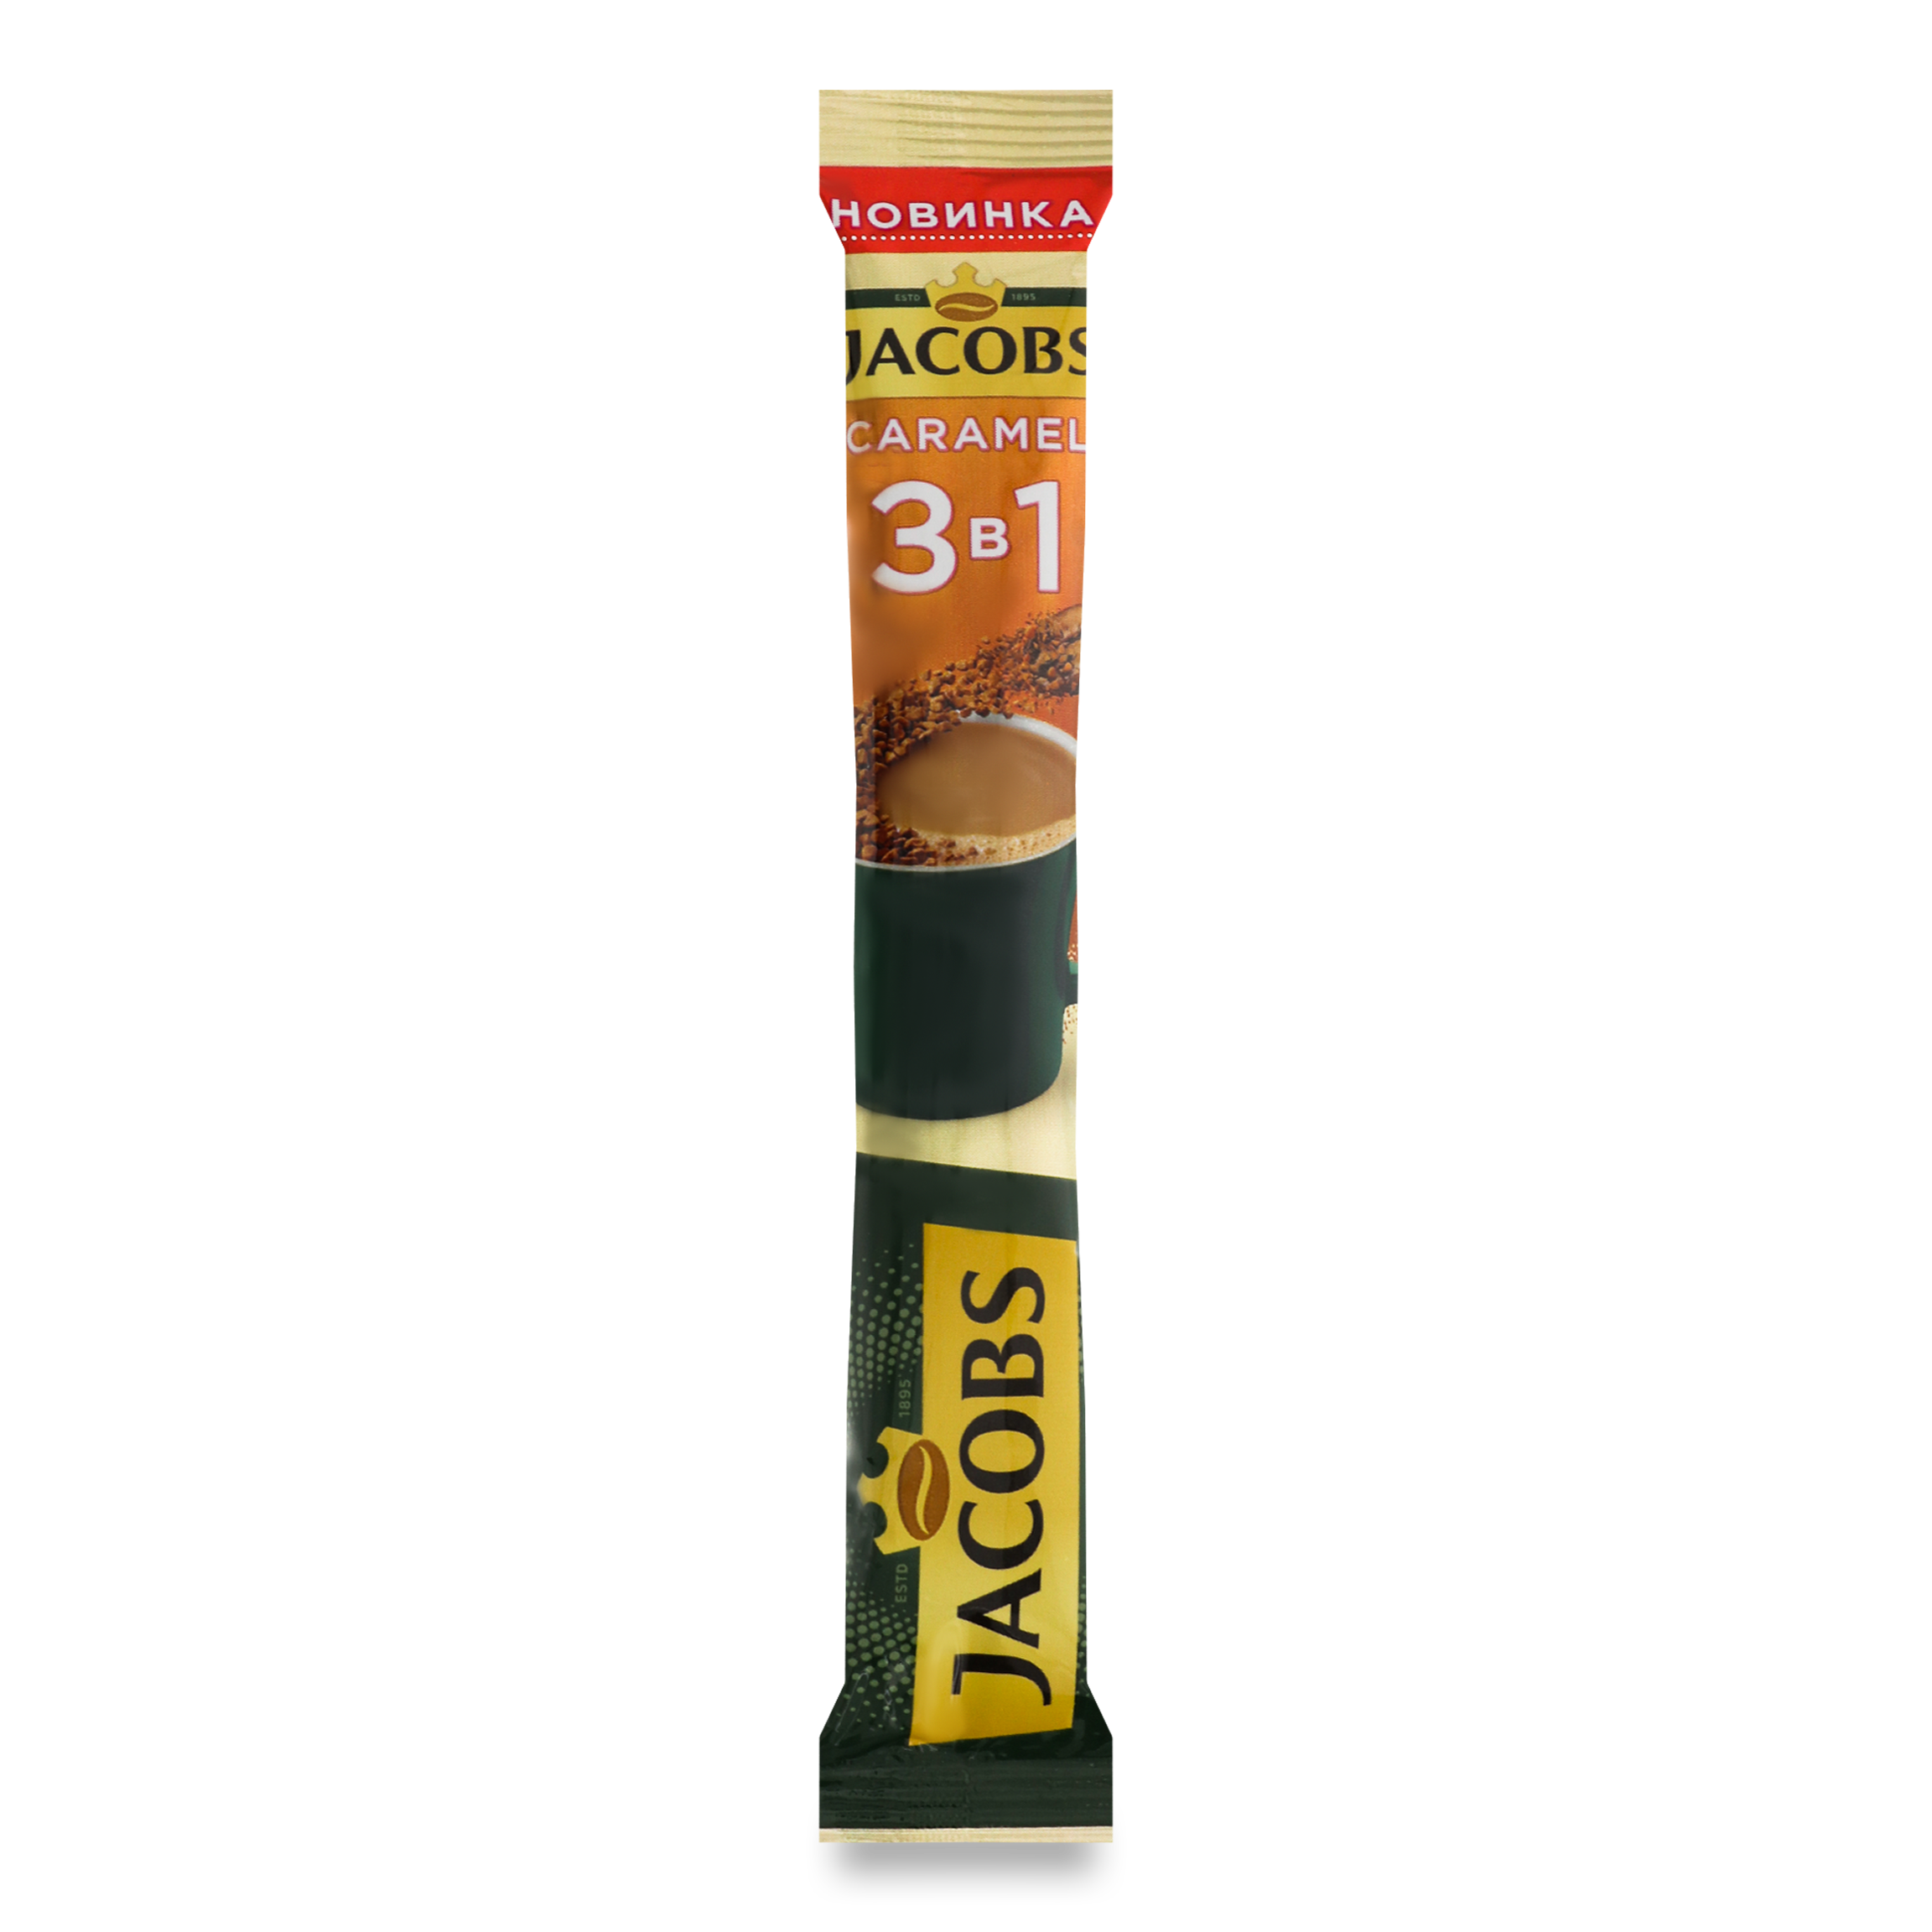 Jacobs Caramel 3 in 1 Instant Coffee Drink 15g